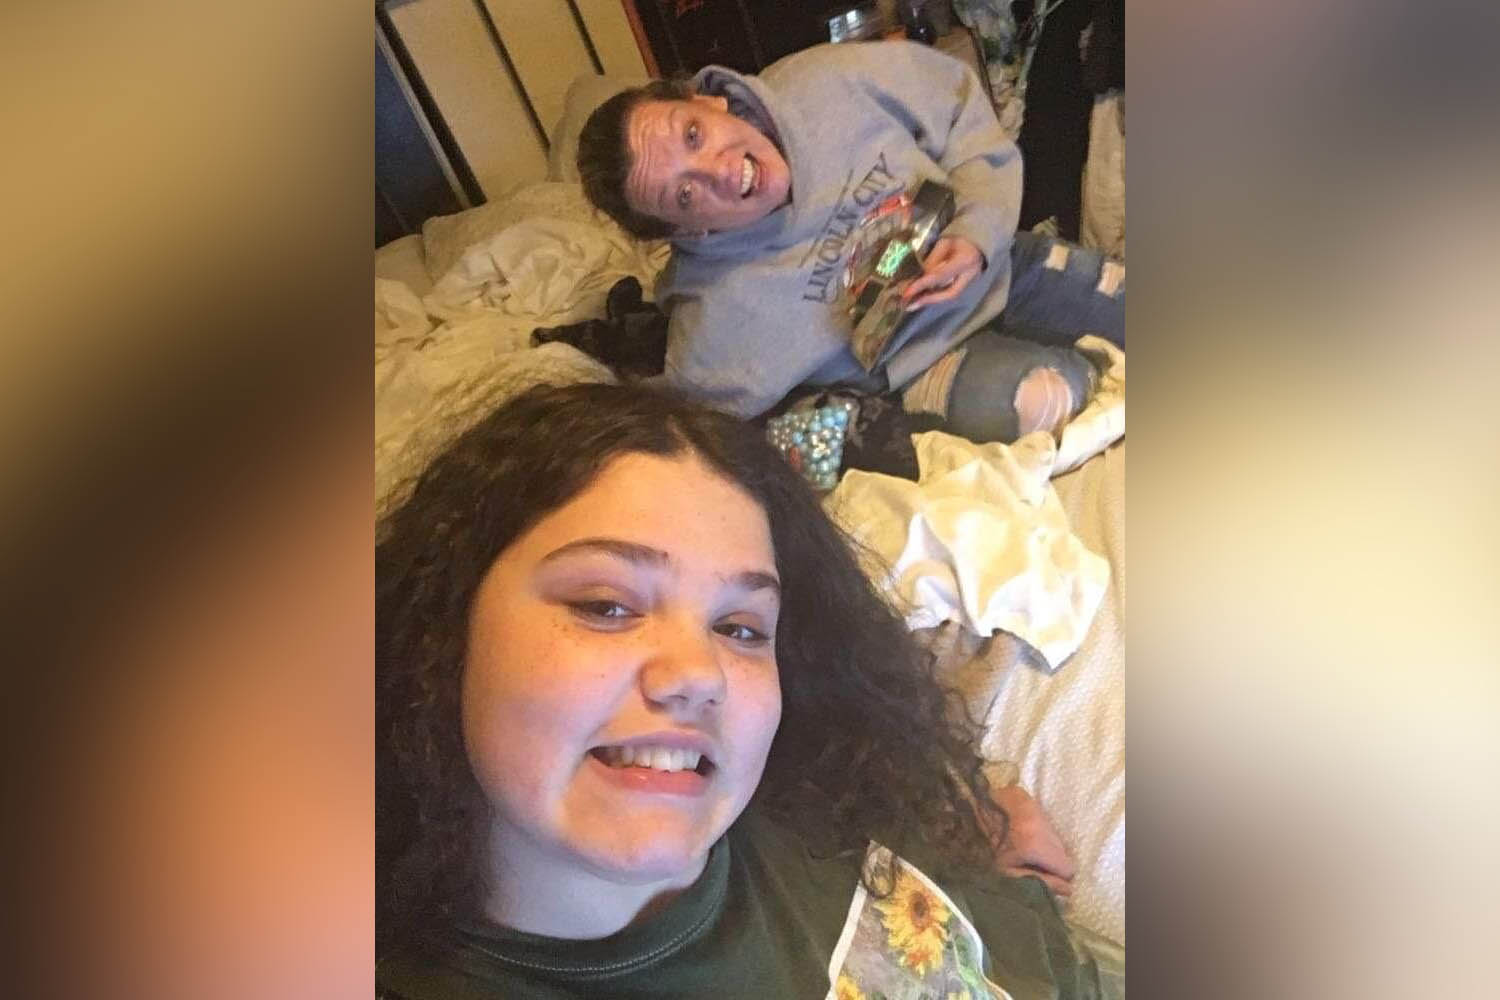 Slipping Mom Sex - 13-year-old girl severely burned while imitating TikTok video, family says  - ABC News